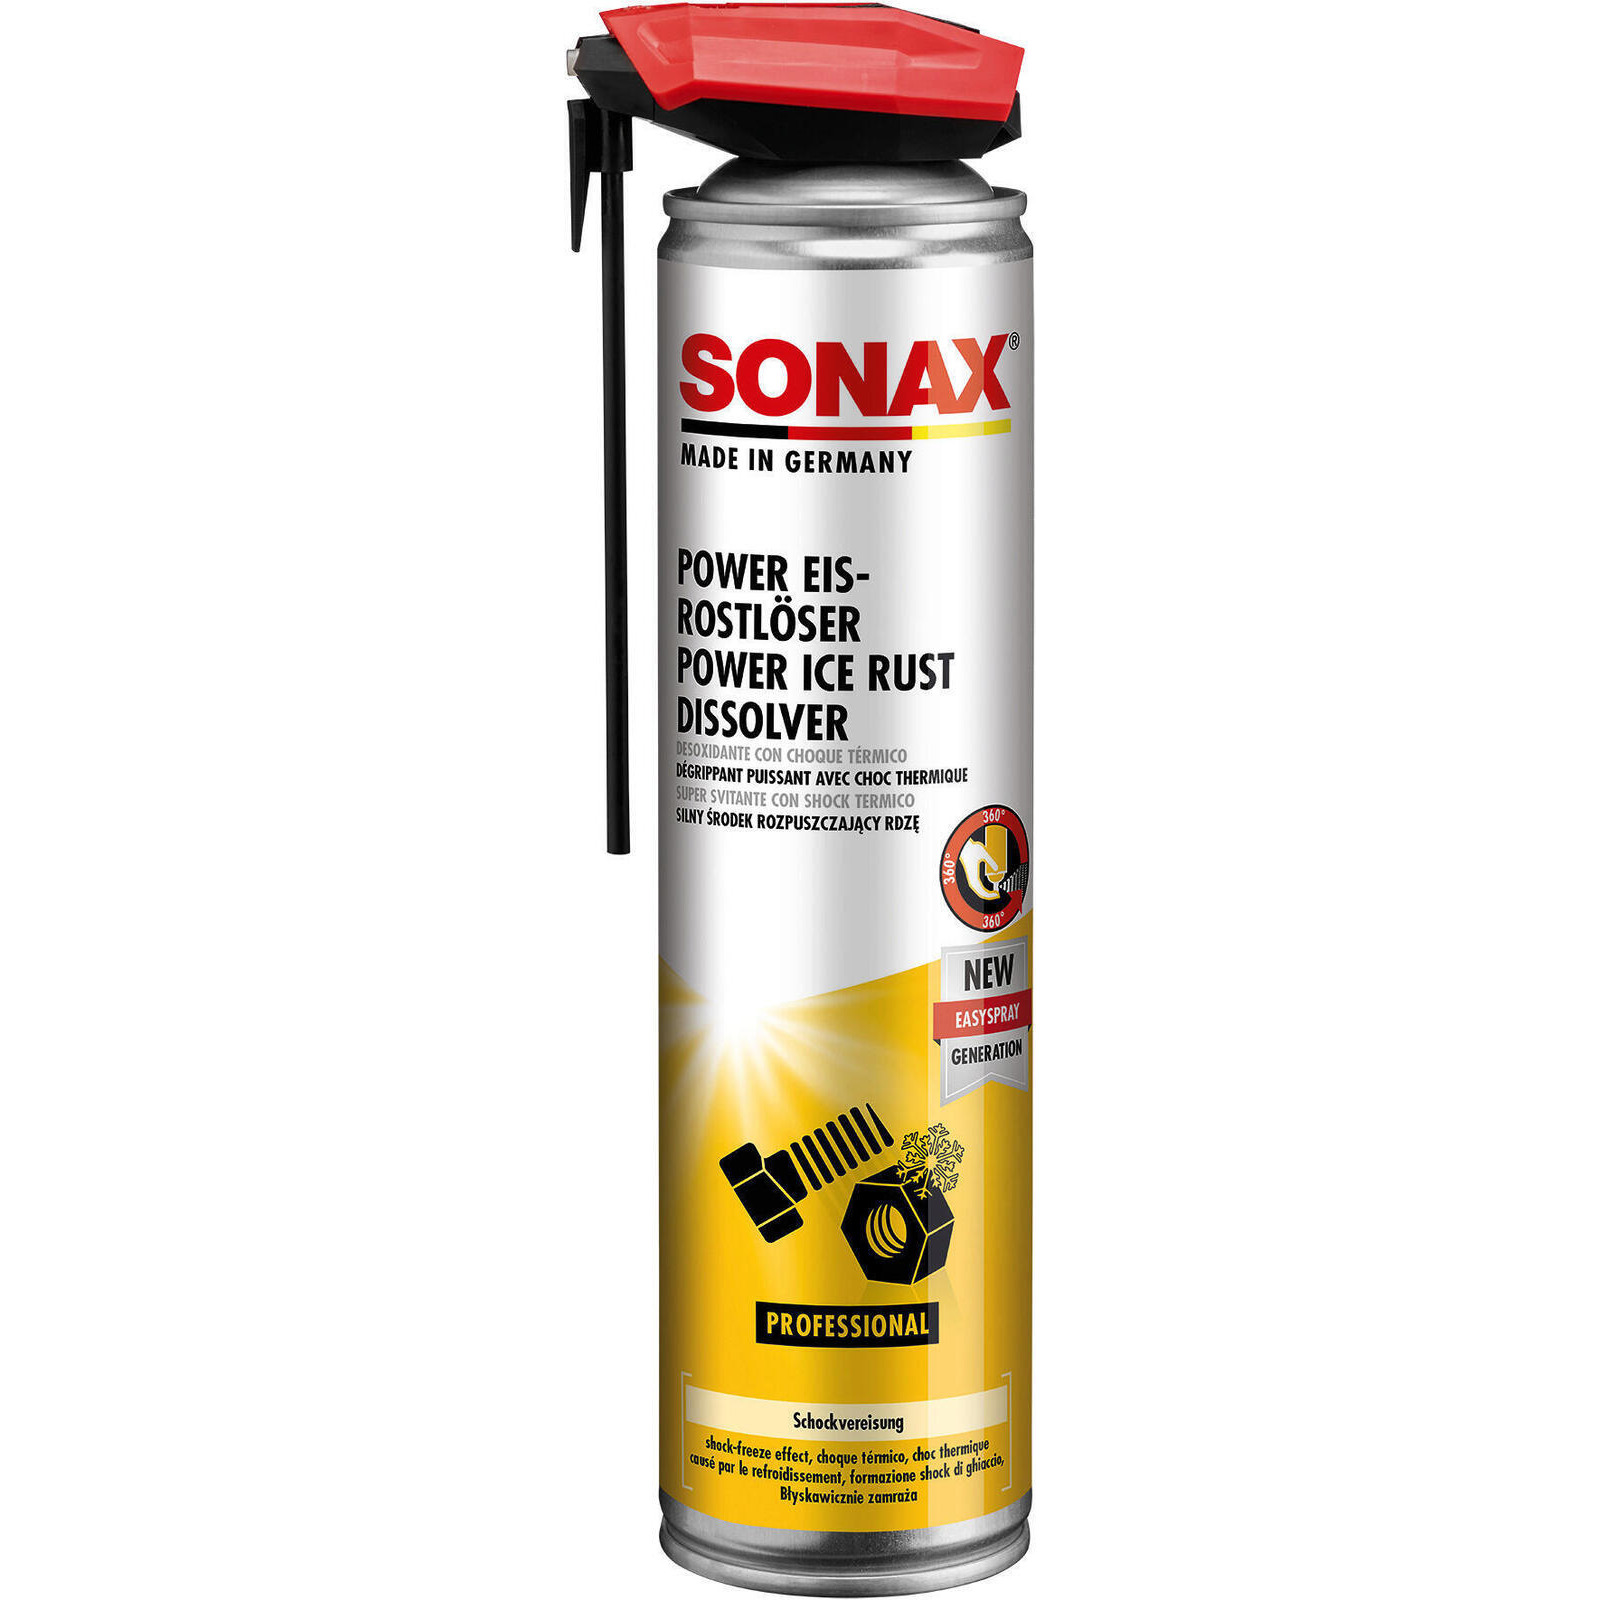 SONAX Rust Solvent Power Ice rust dissolver with EasySpray